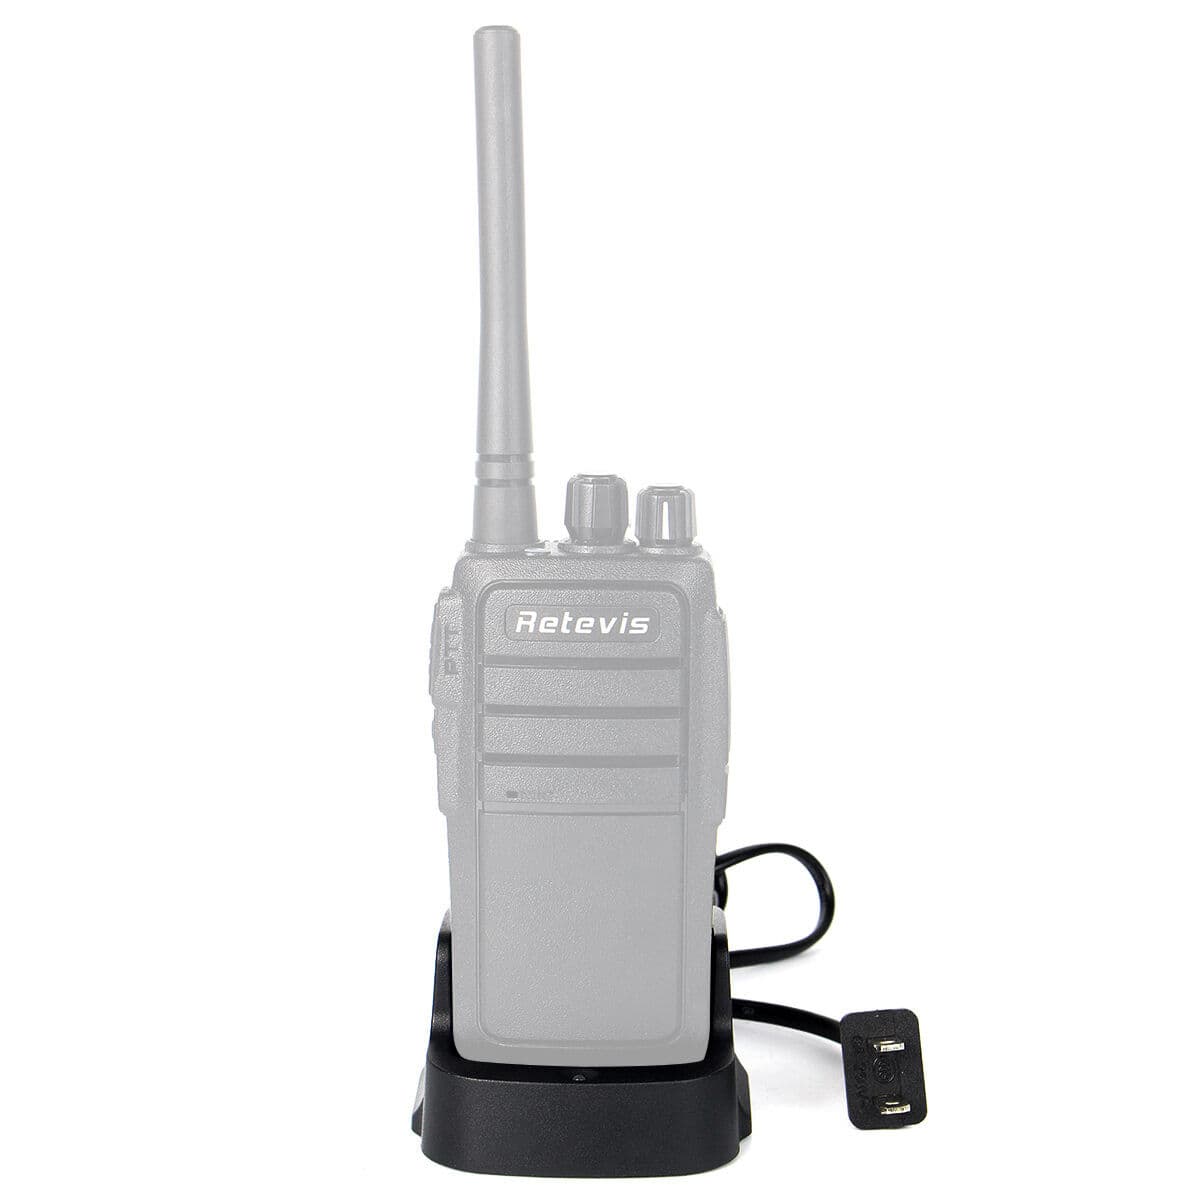 Original Radio Battery Charger Station for Retevis RT21 Walkie Talkie